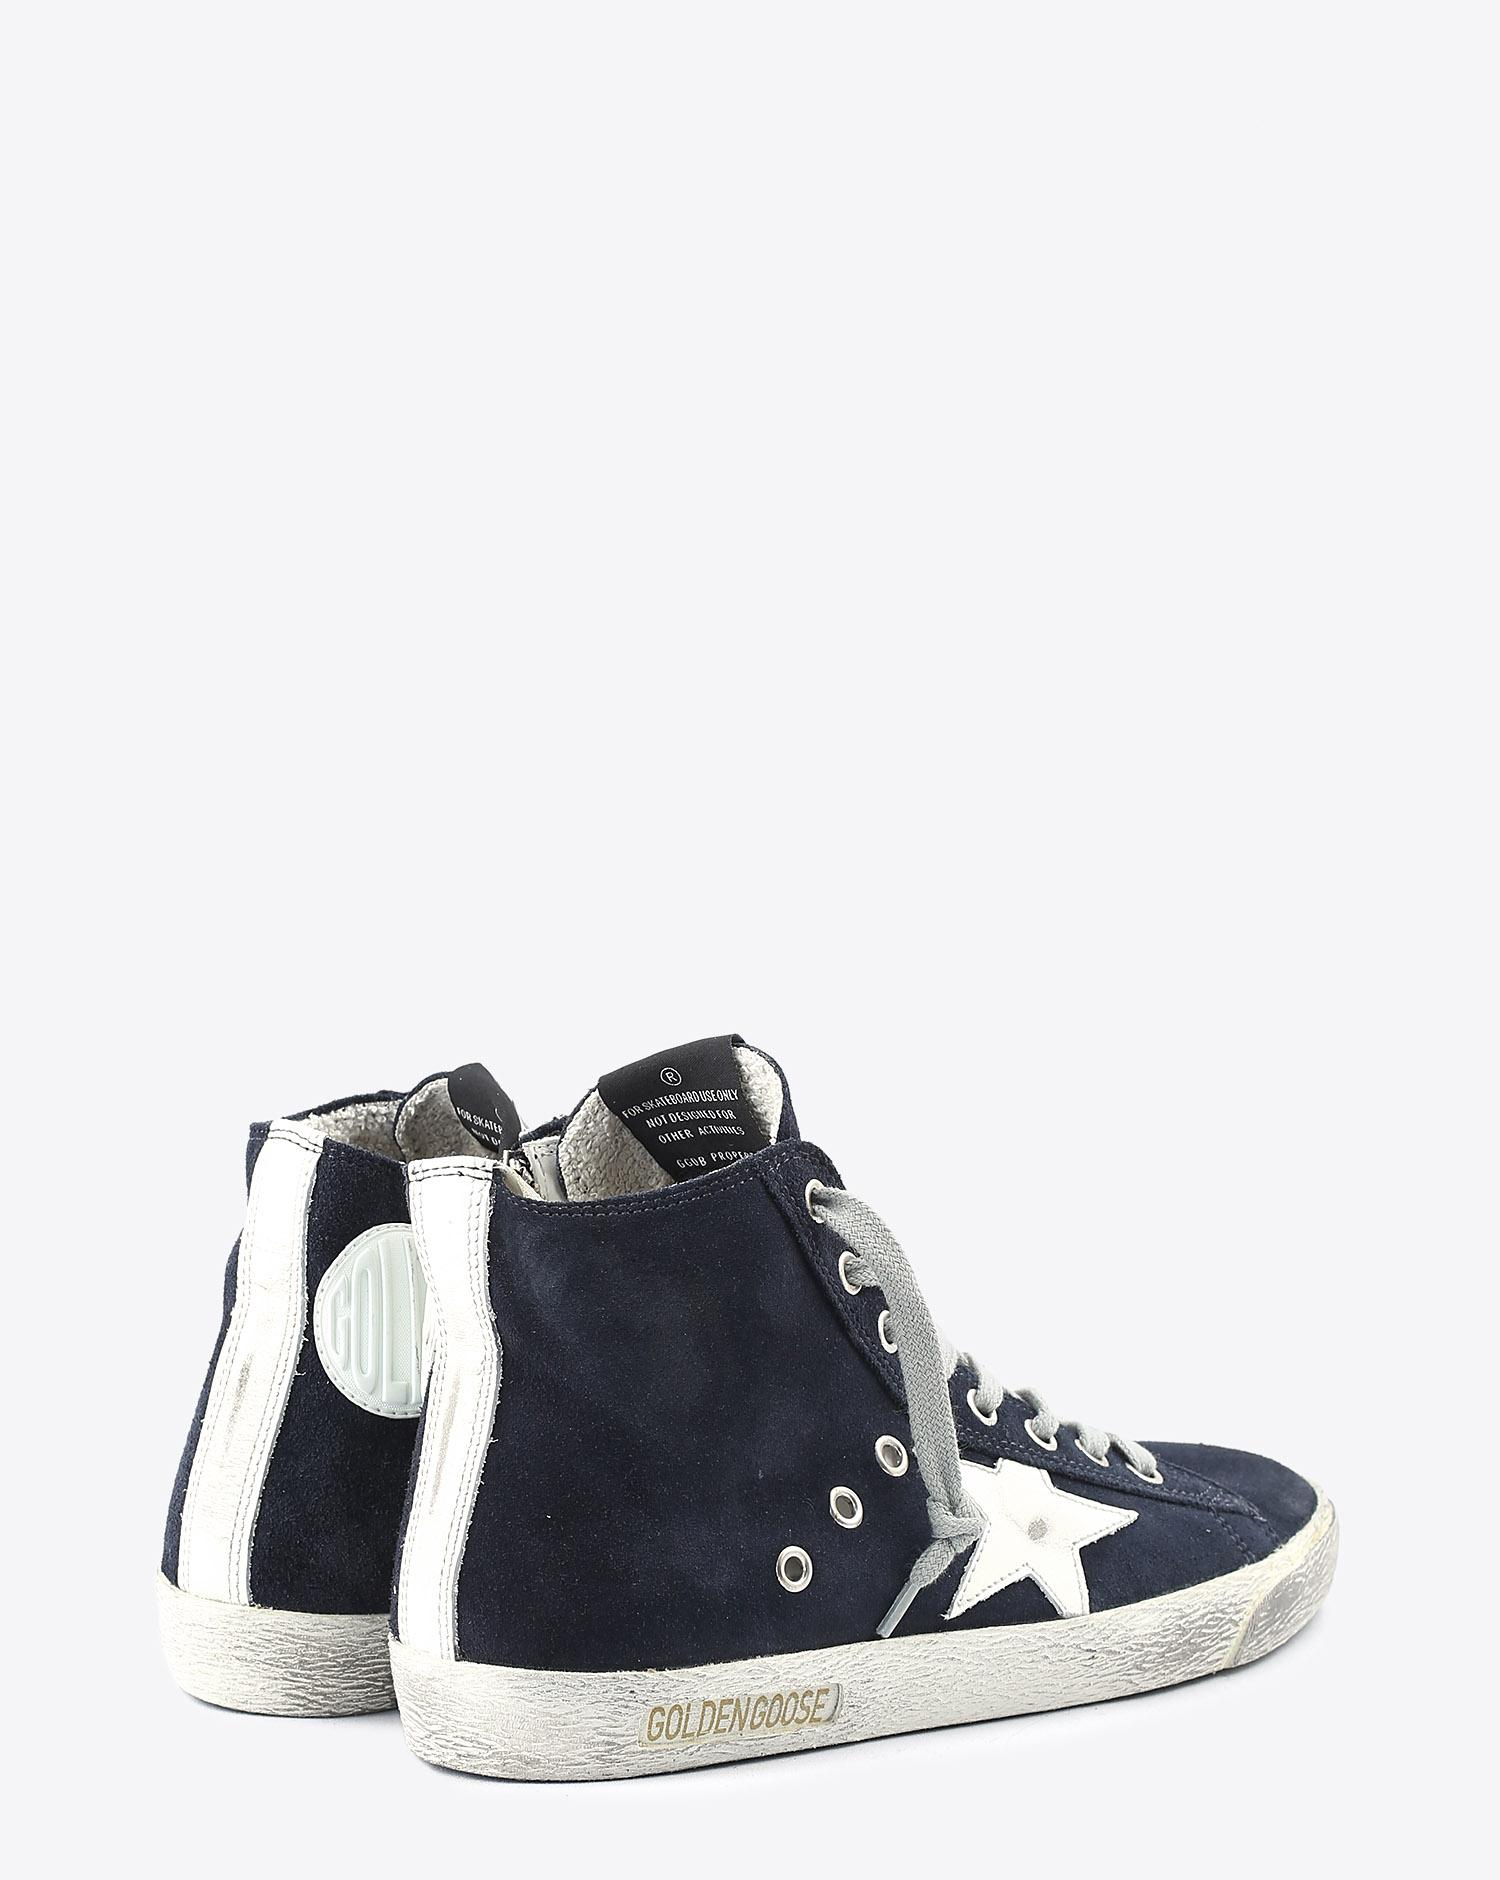 Sneakers femme Francy Classic Night Blue White 50517 Golden Goose. Dos. 